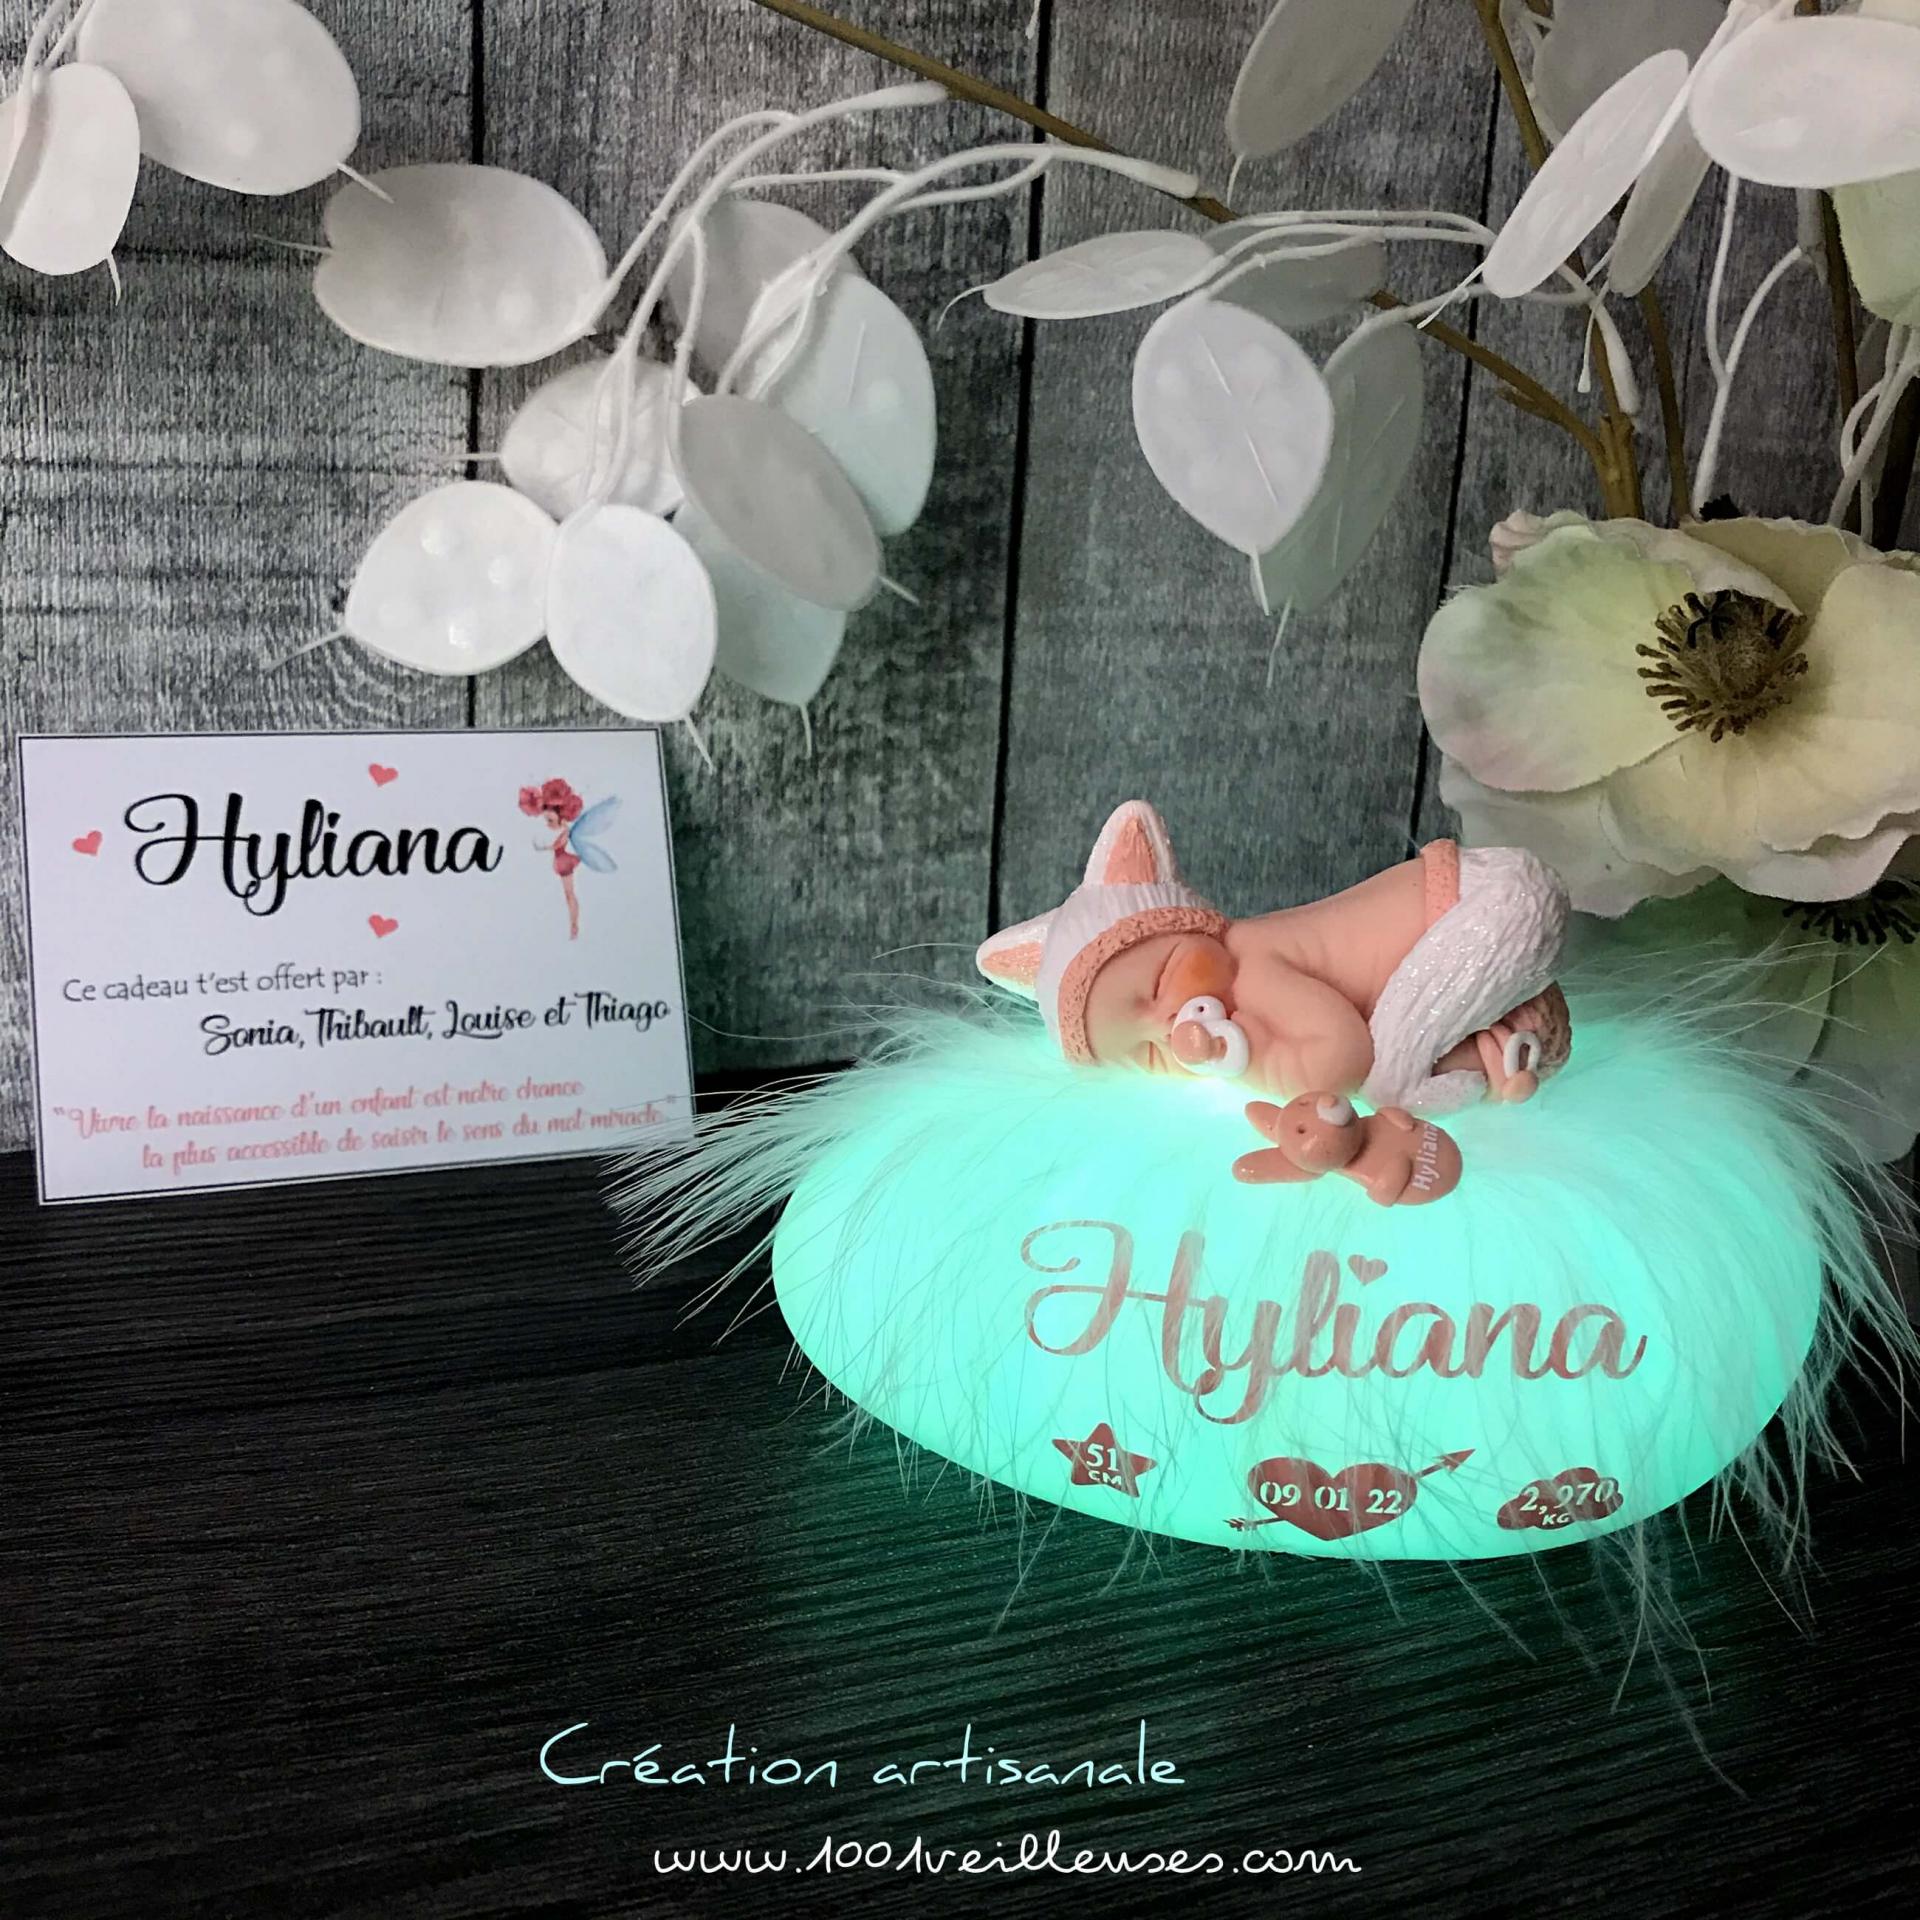 Luminous pebble with baby fimo in the cat theme, personalized with the child's name, along with its personalized message